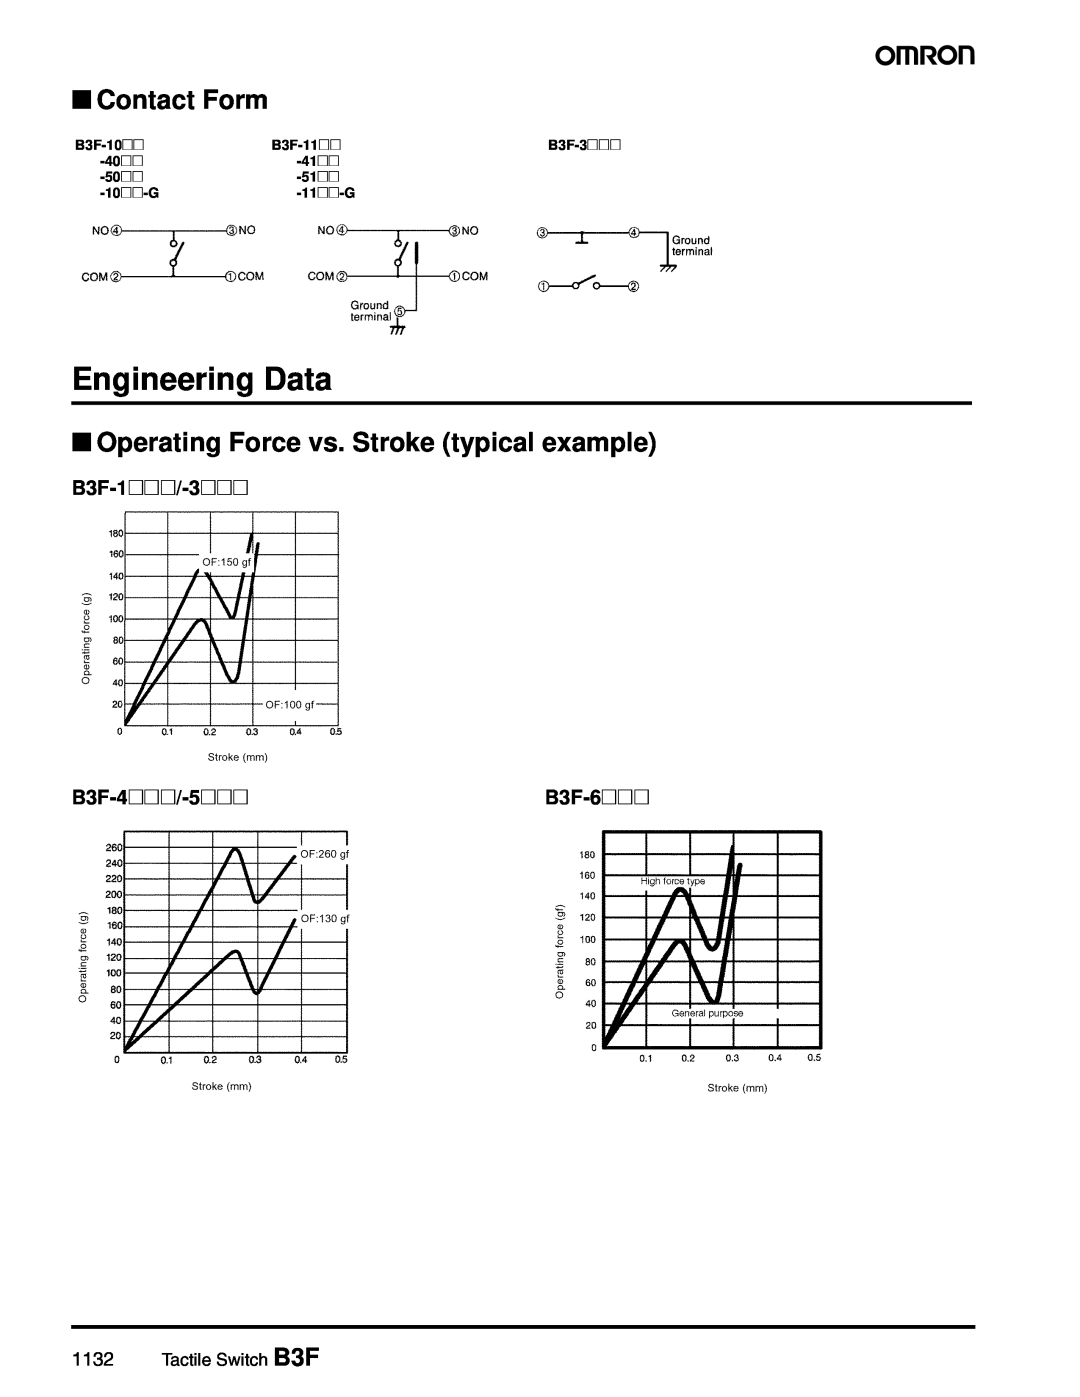 Omron manual Engineering Data, Contact Form, Operating Force vs. Stroke typical example, B3F-1@@@/-3@@@, B3F-4@@@/-5@@@ 